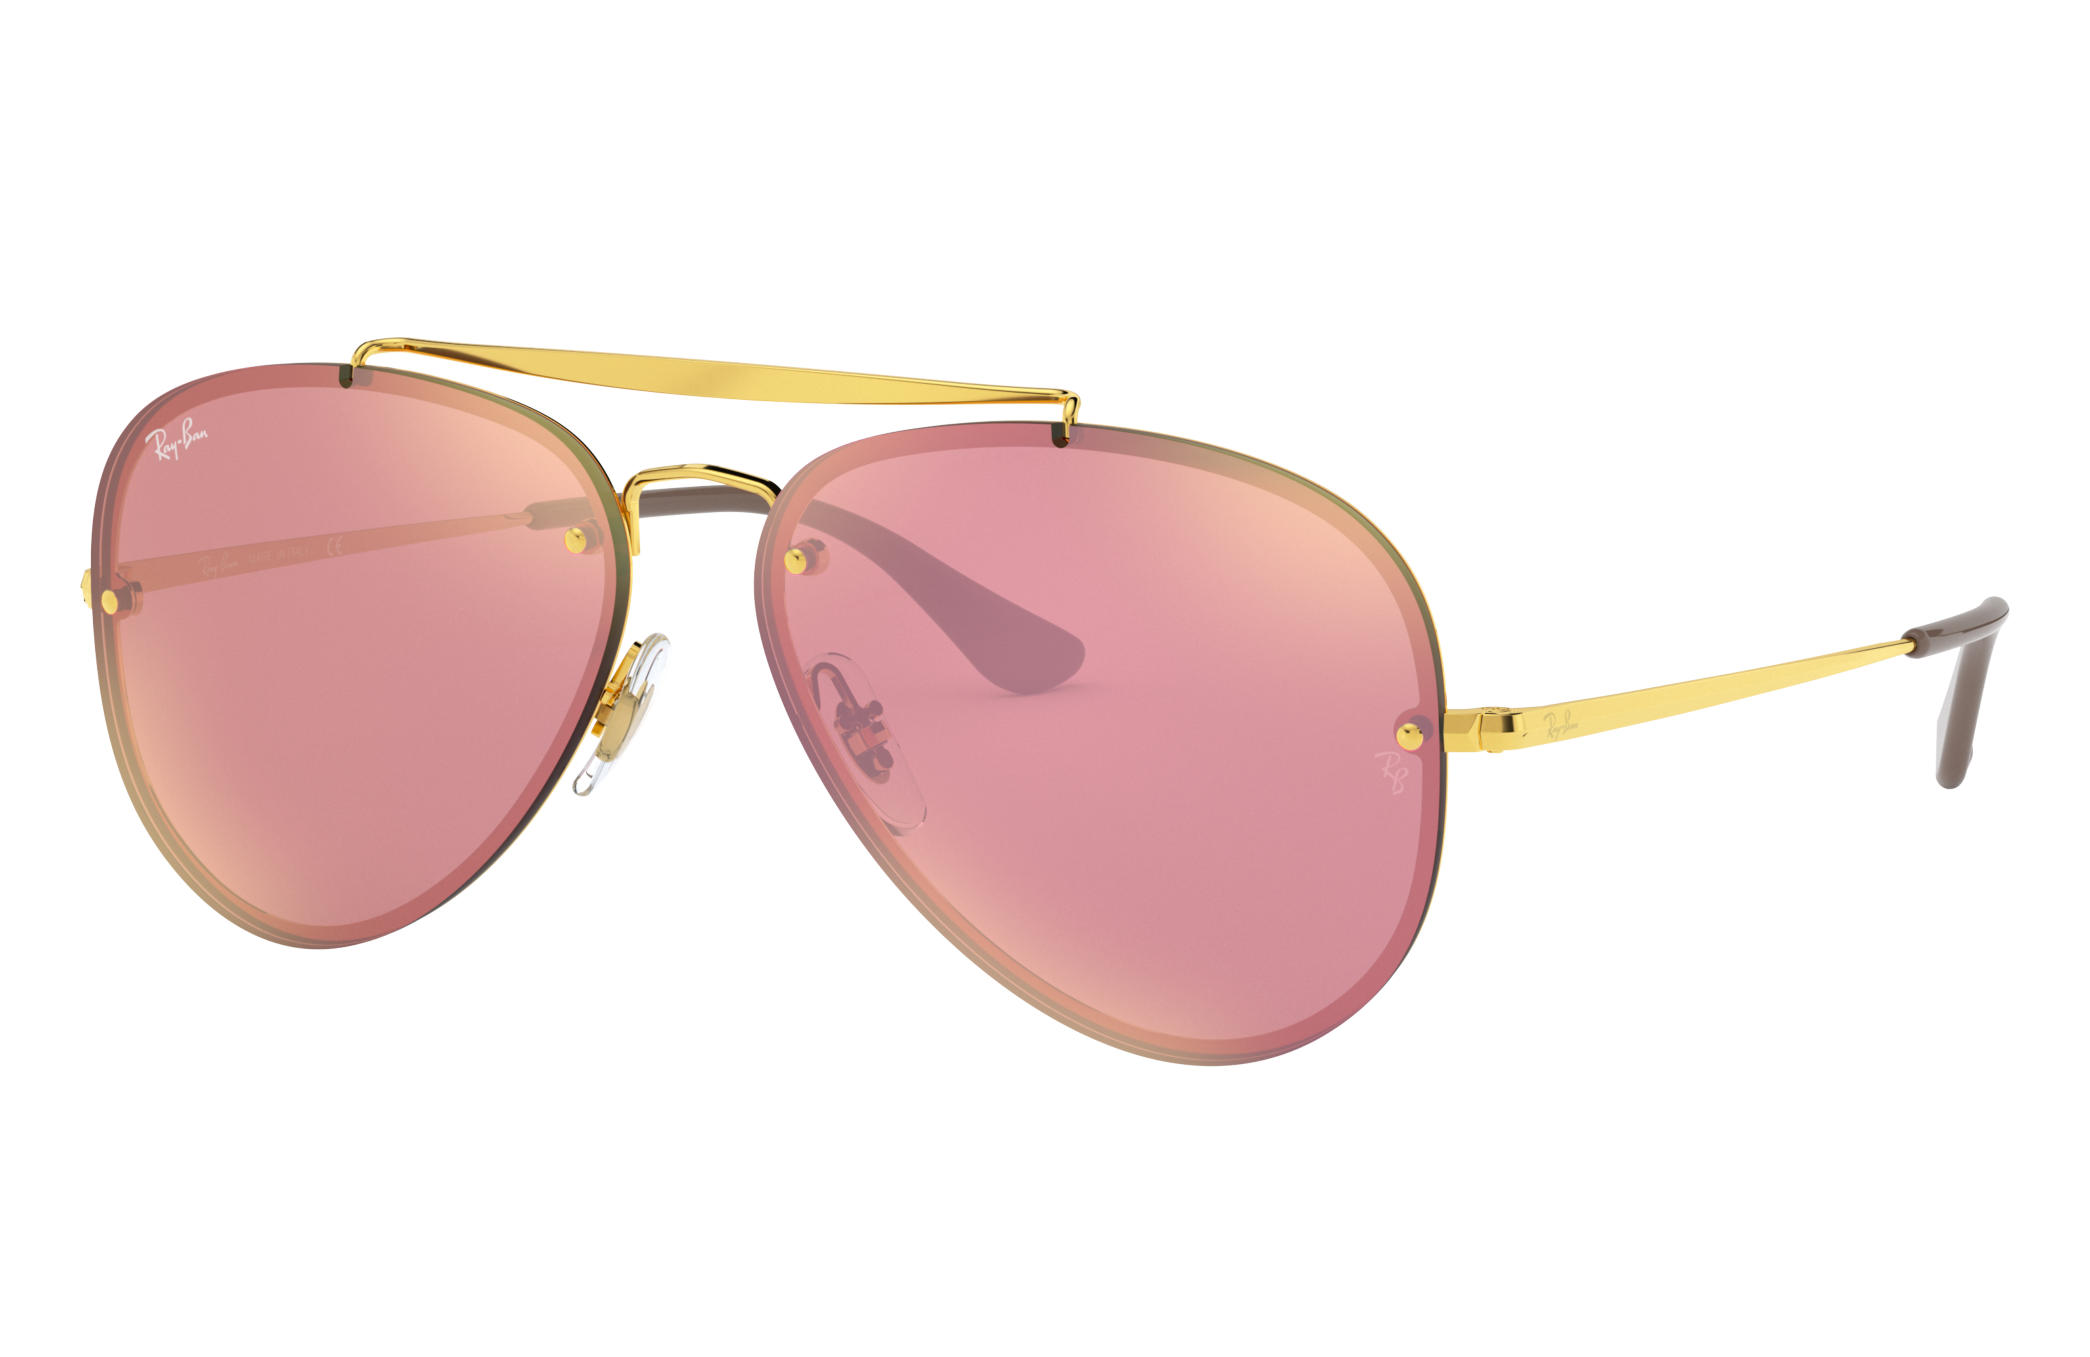 Blaze Aviator Sunglasses in Gold and Pink | Ray-Ban®